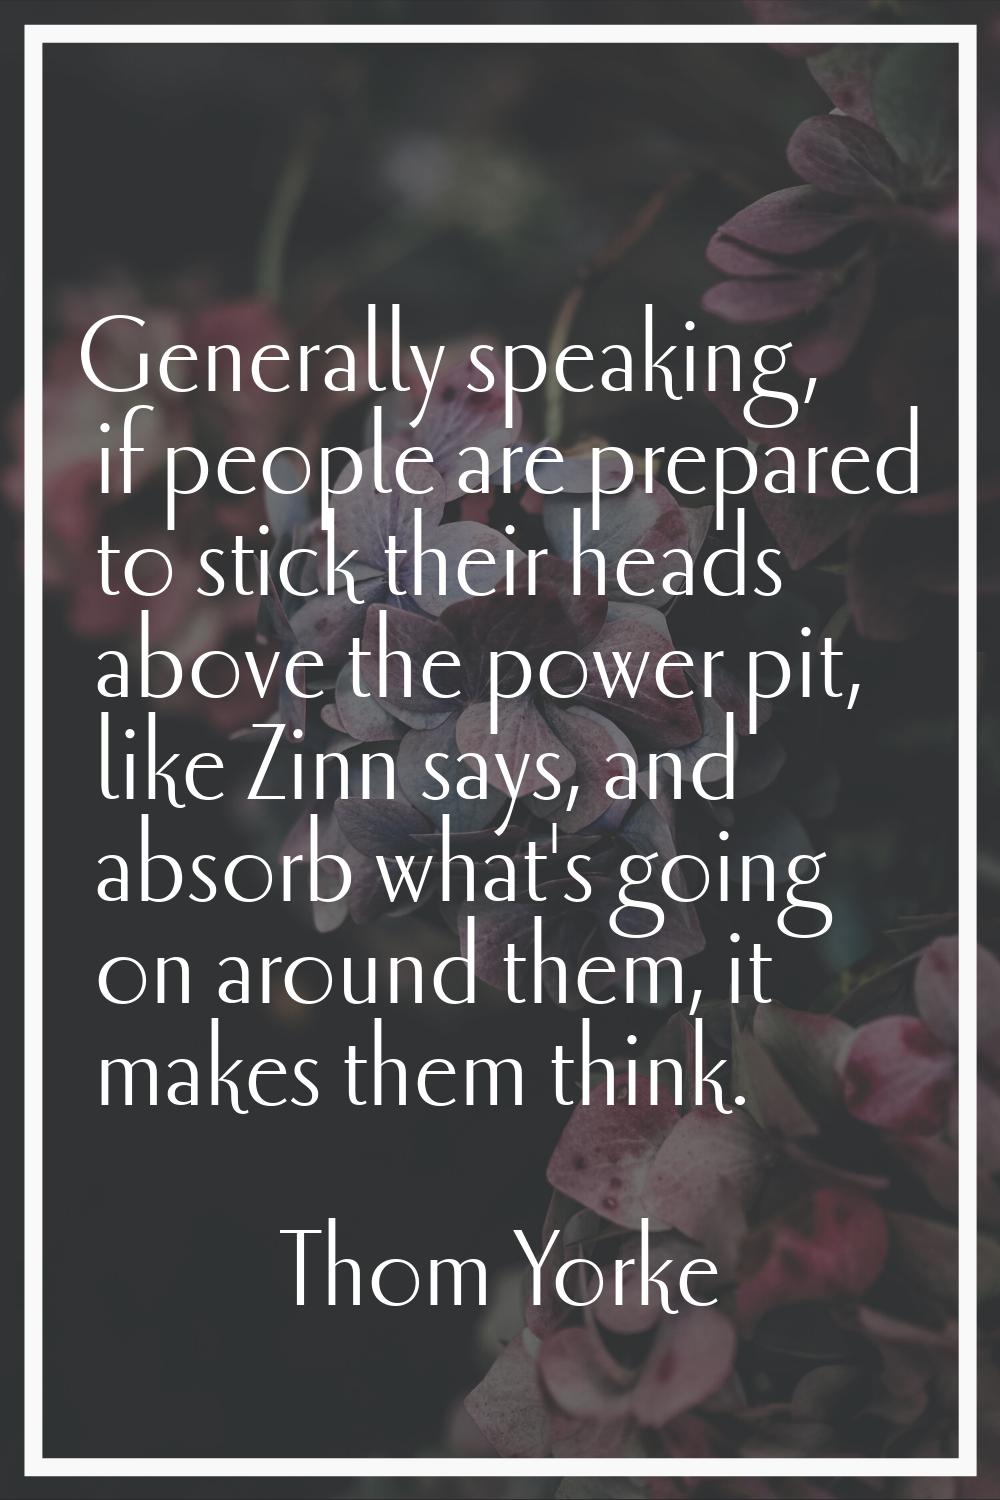 Generally speaking, if people are prepared to stick their heads above the power pit, like Zinn says